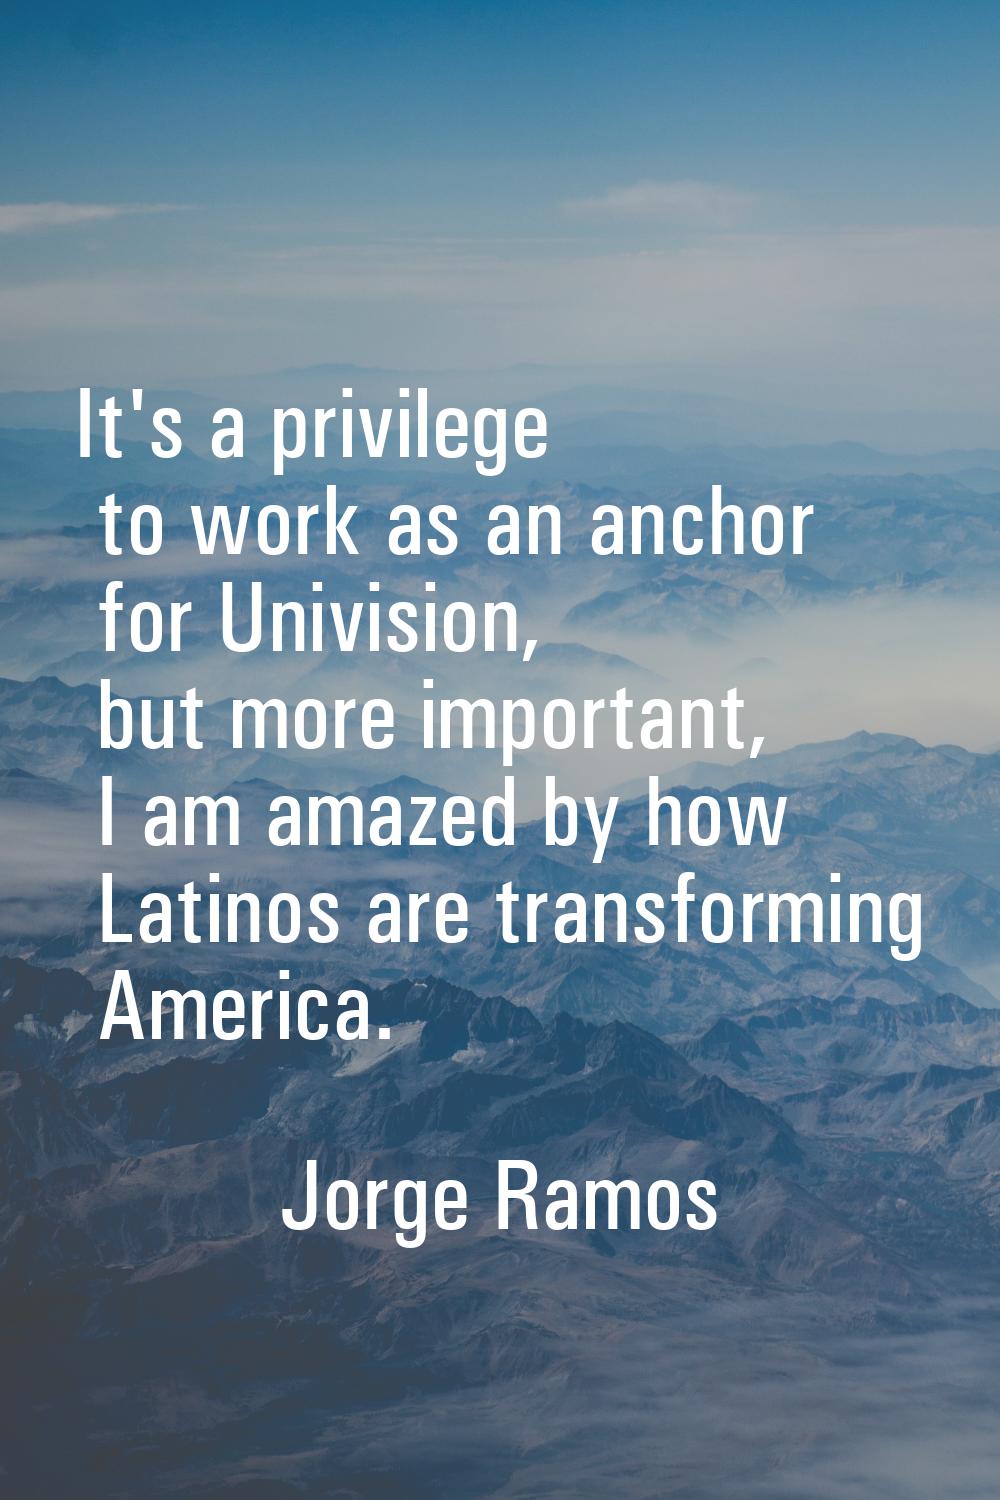 It's a privilege to work as an anchor for Univision, but more important, I am amazed by how Latinos